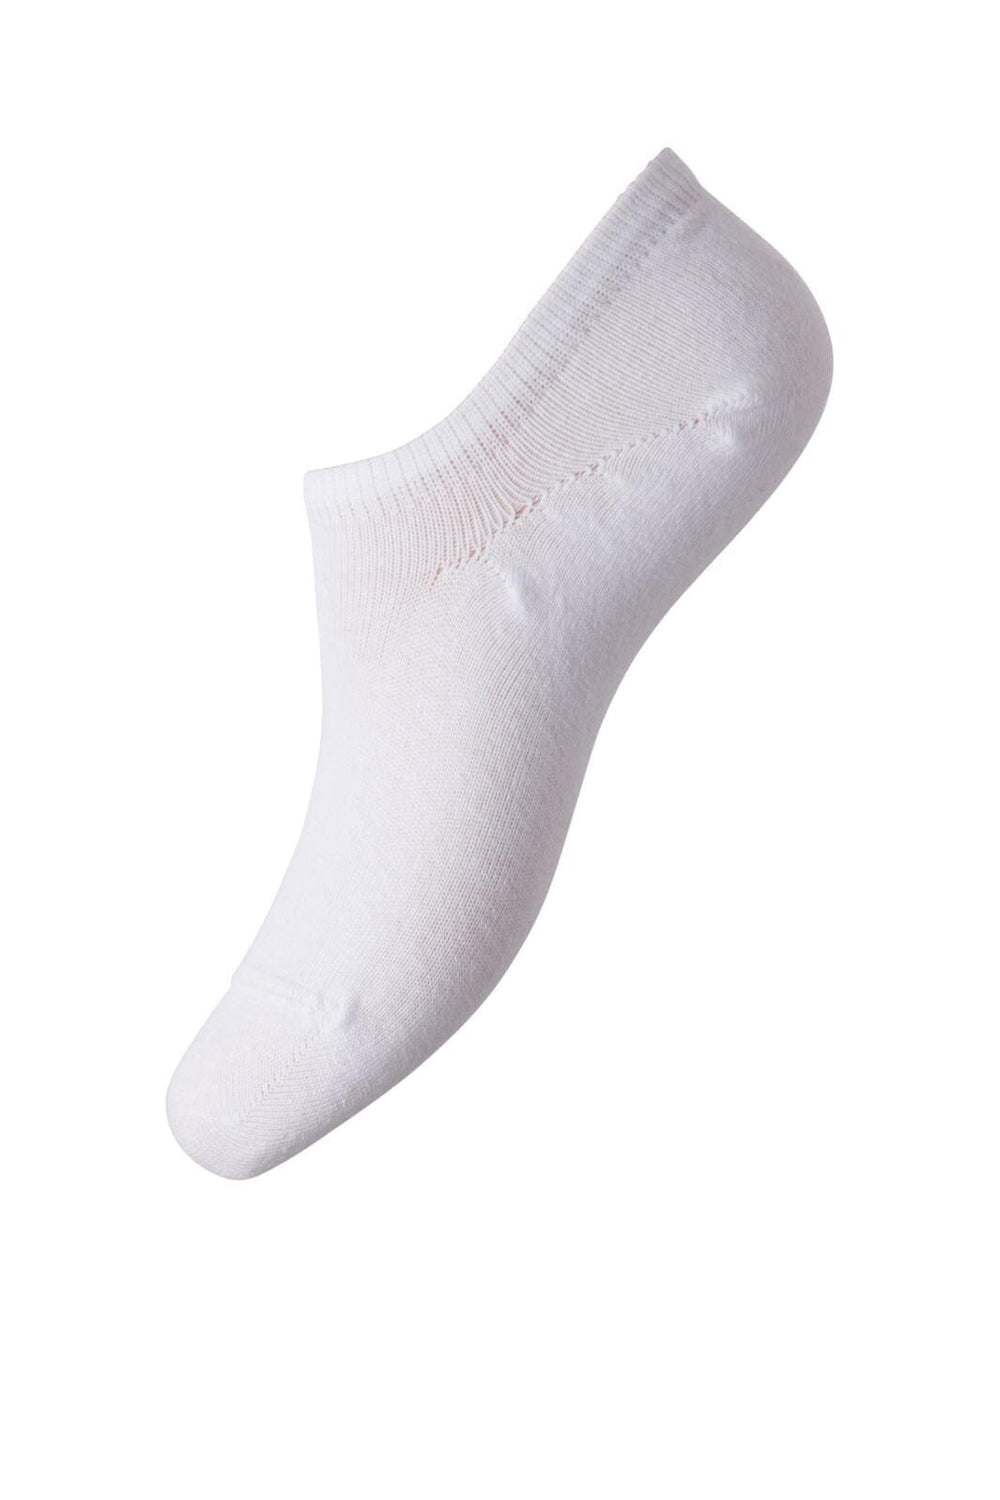 Pieces, Pctess 2 Pack Sneaker Socks, Bright White